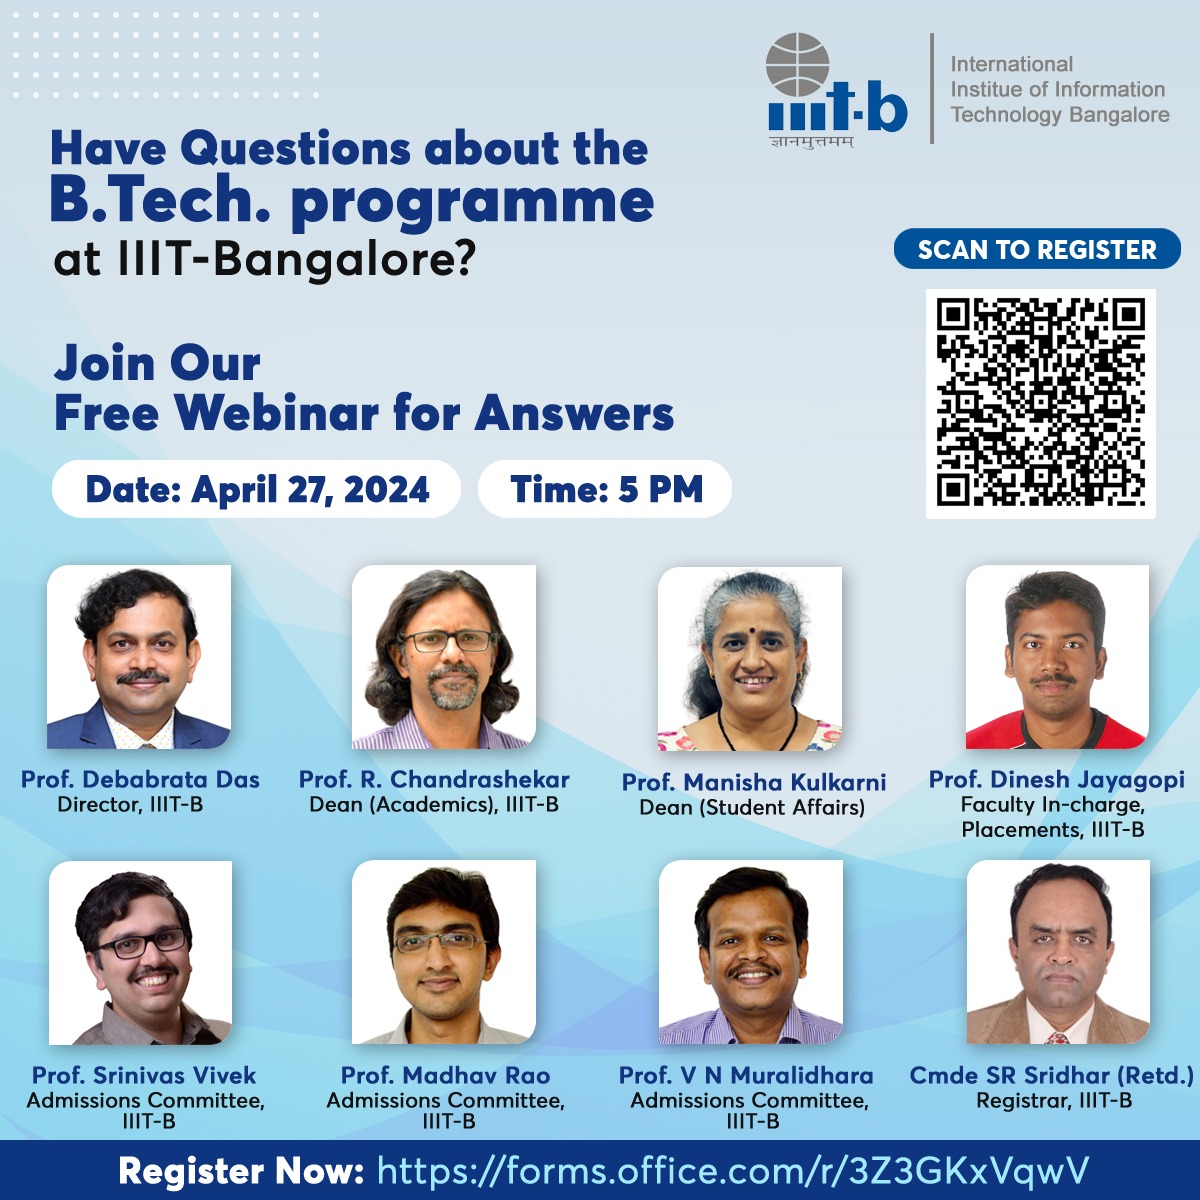 Have Questions about the B.Tech. programme at IIIT-Bangalore? Join Our Free Webinar for Answers Date: April 27, 2024 Time: 5 PM Register Now: forms.office.com/r/3Z3GKxVqwV About B.Tech. programme: iiitb.ac.in/courses/btech-… #IIITB #IIITBangalore